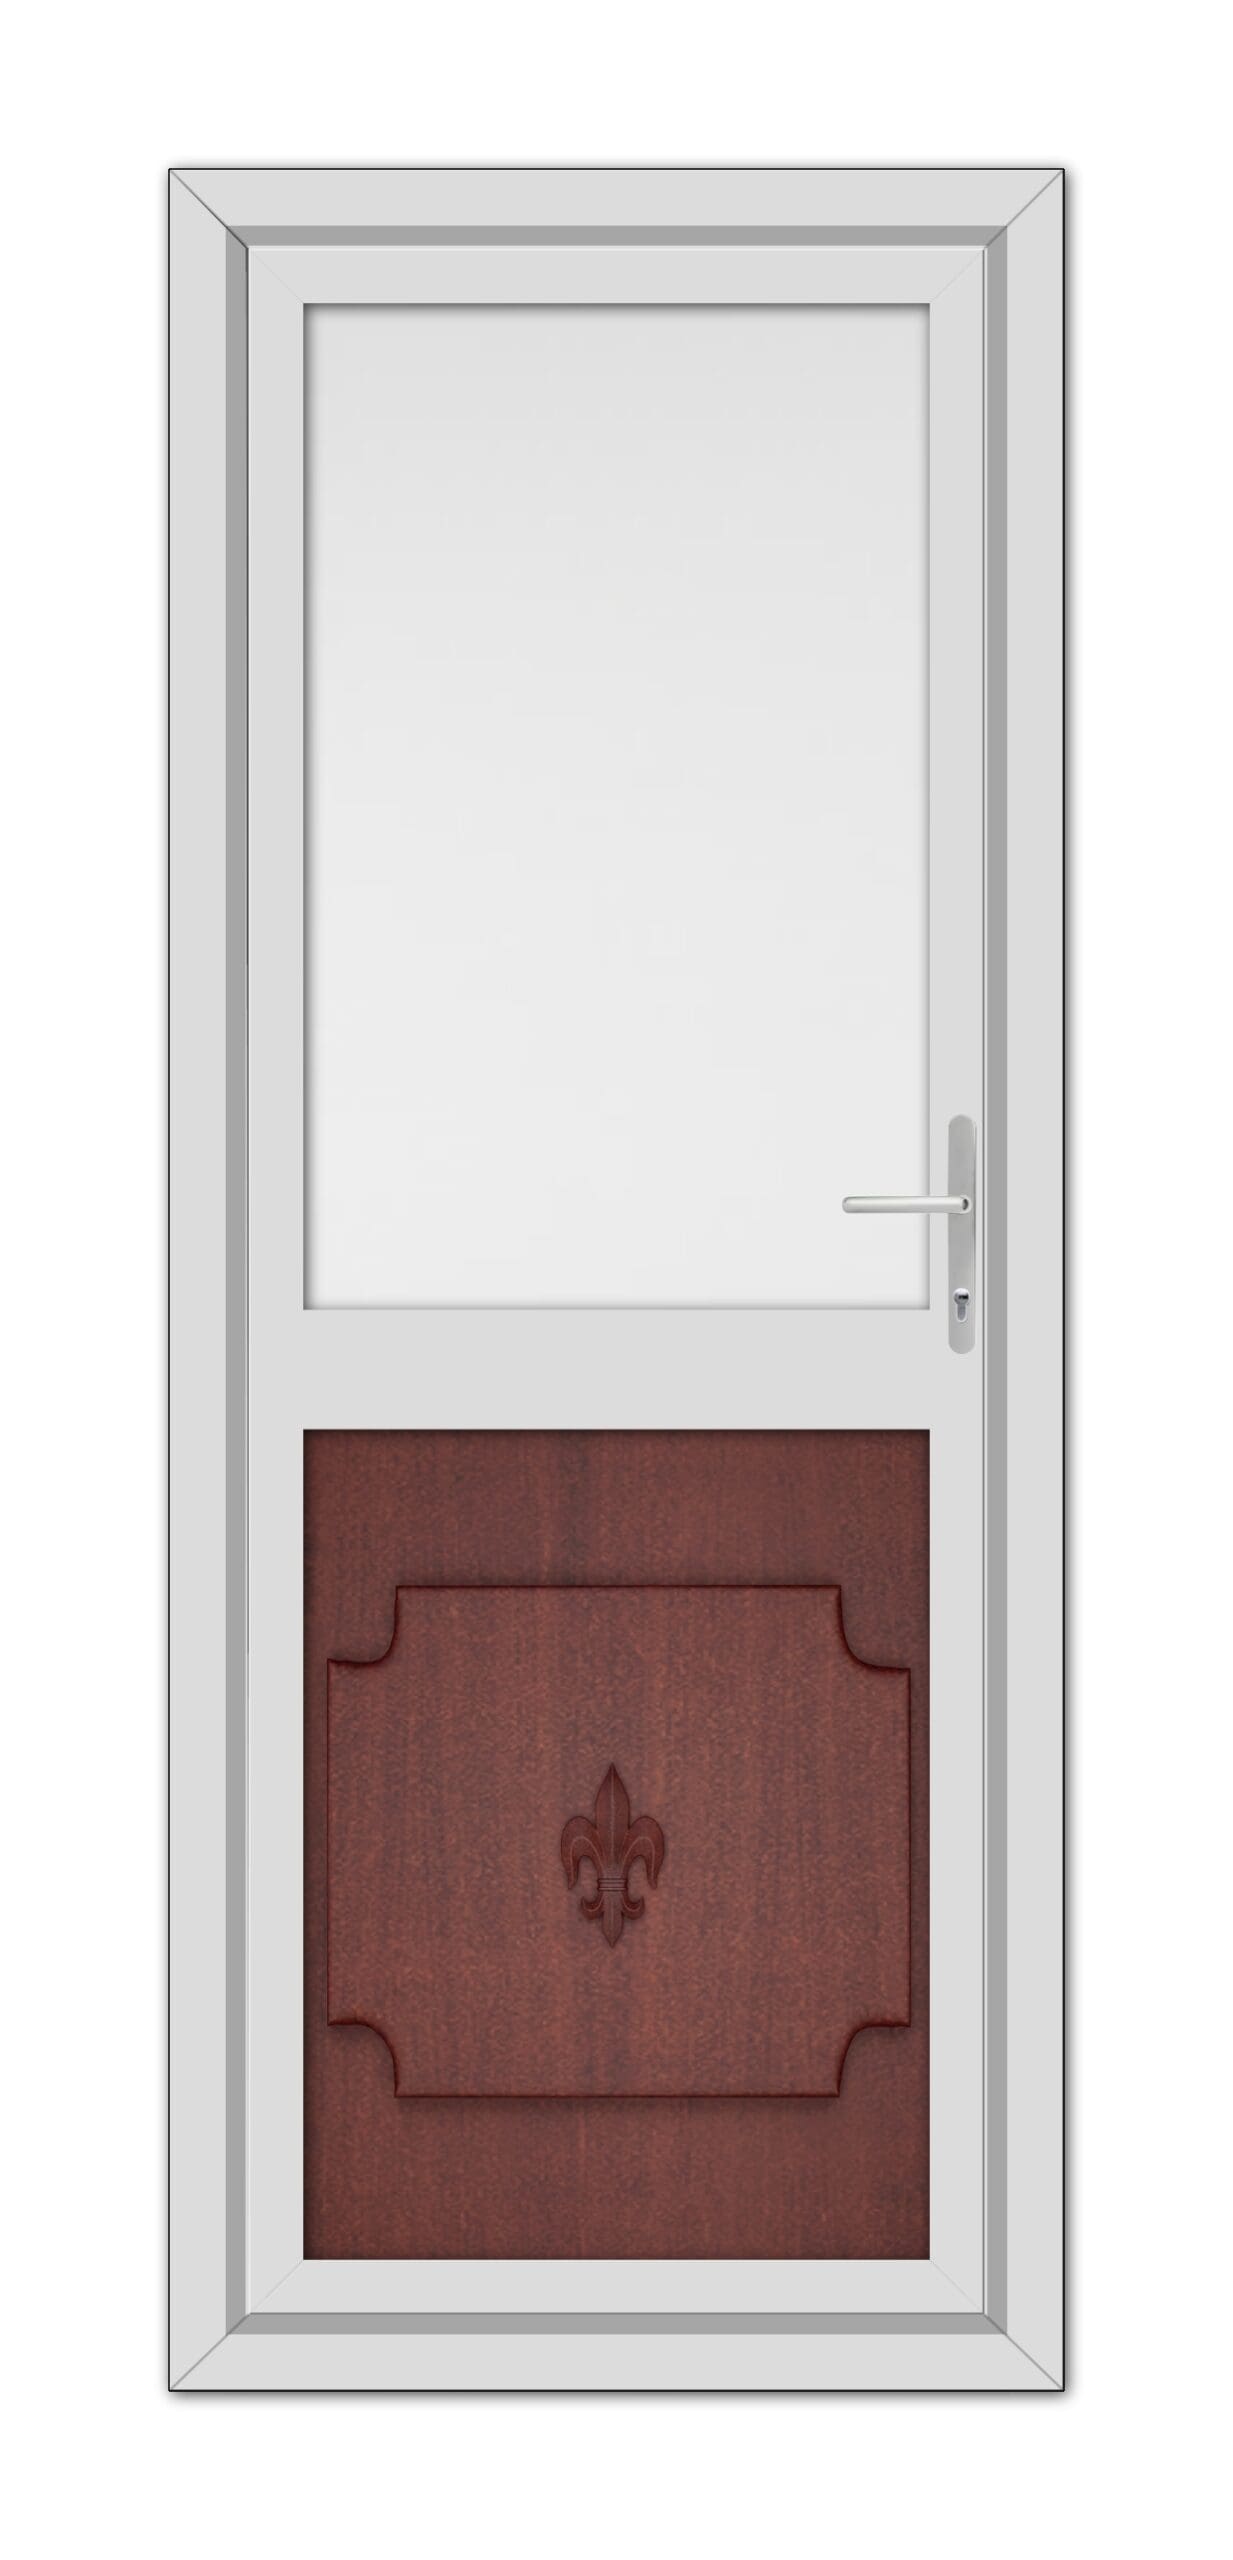 A Mahogan Abbey Half uPVC Back Door with a white frame, featuring a wooden panel embossed with a fleur-de-lis design and a simple metallic handle.